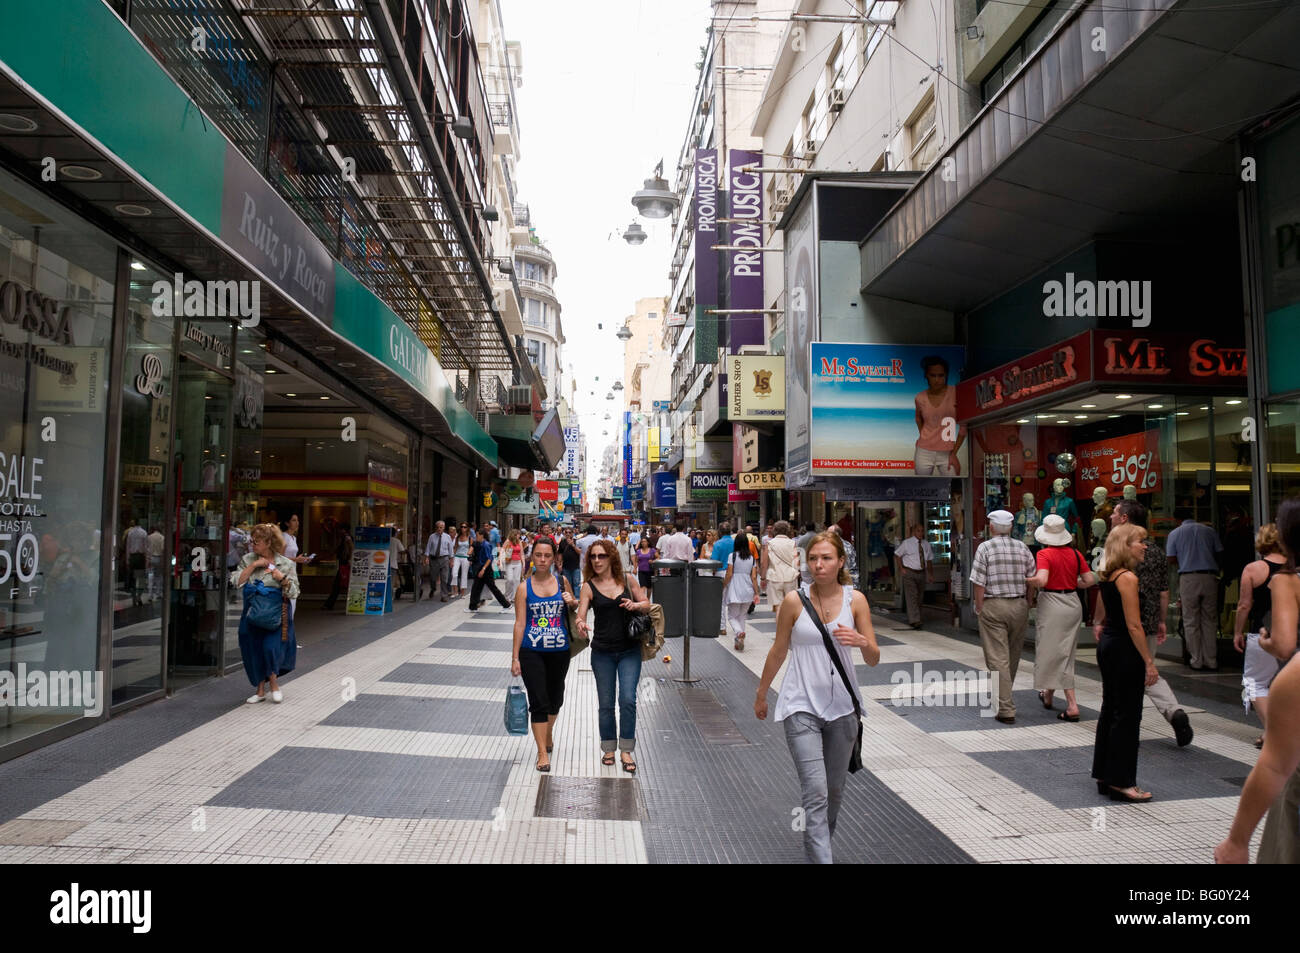 Florida a famous shopping street in Buenos Aires, Argentina, South America Stock Photo